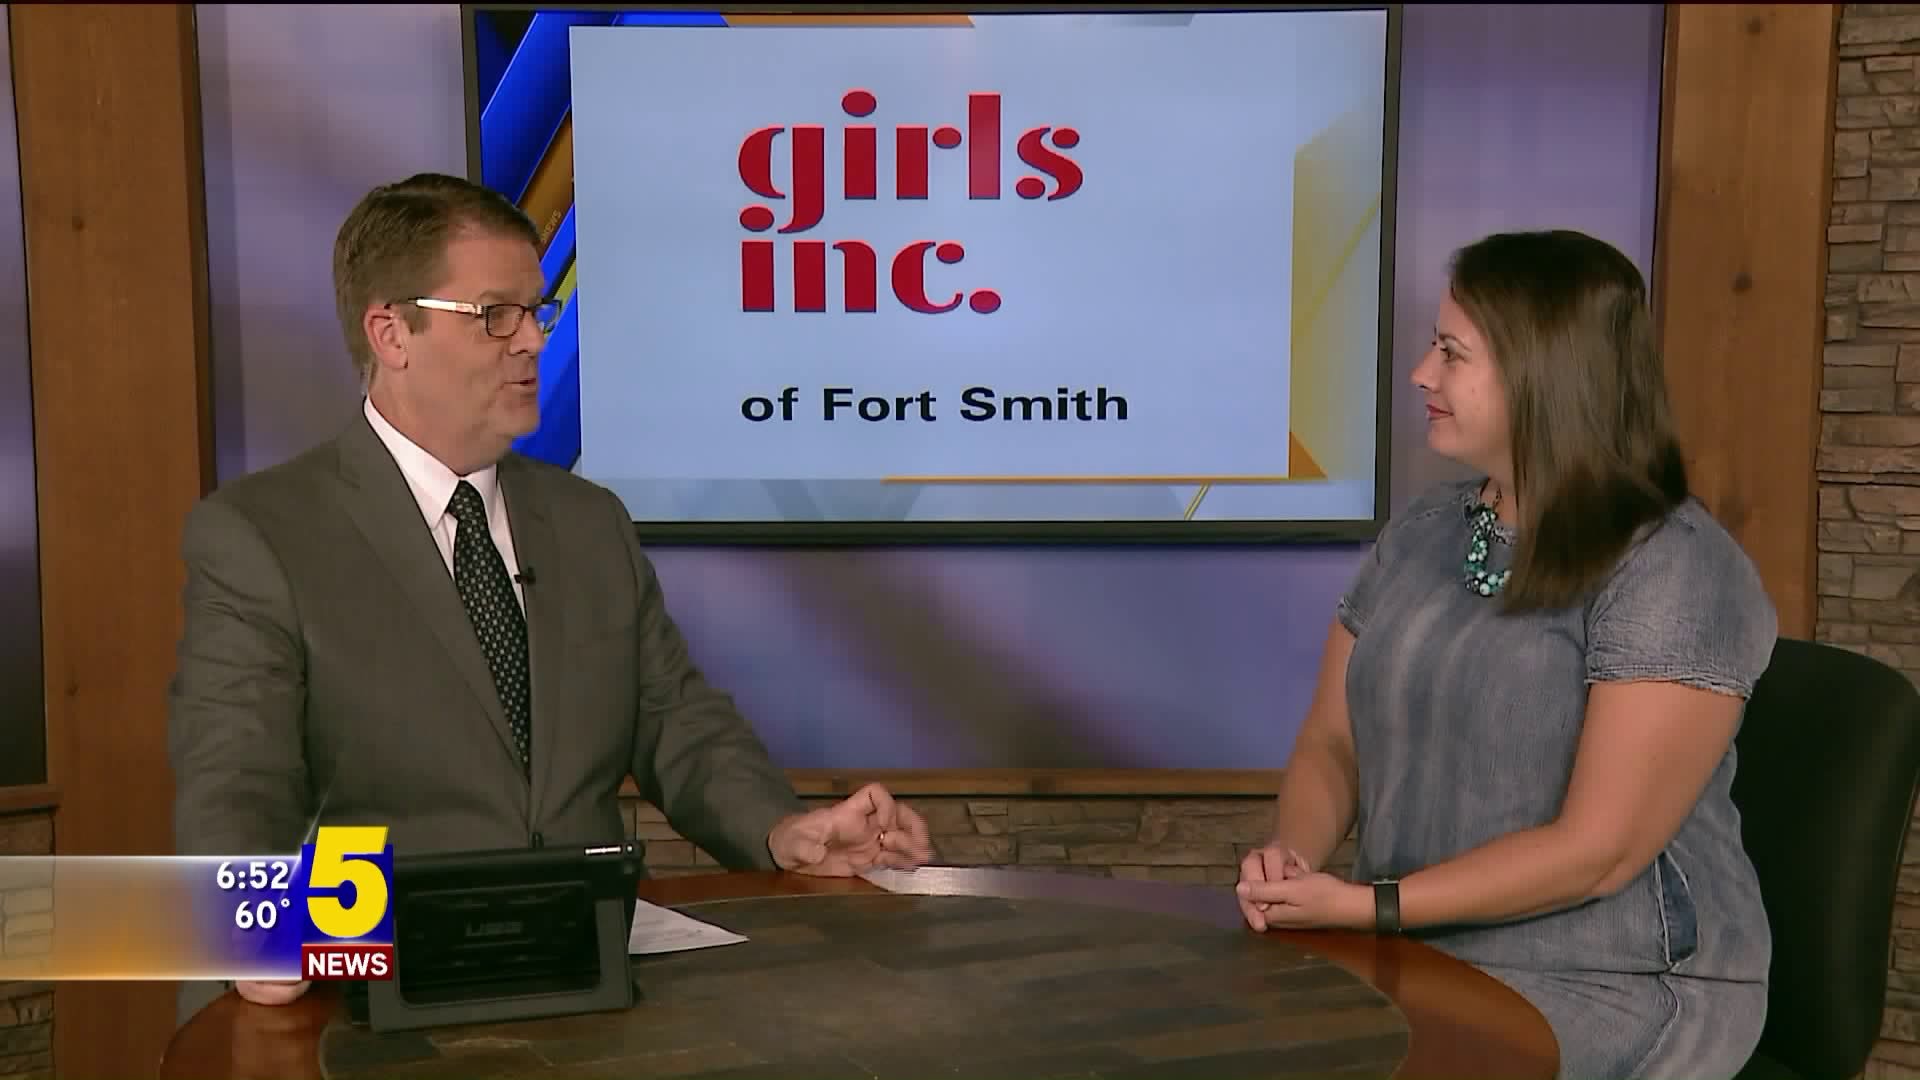 GIRLS INC. OF FORT SMITH